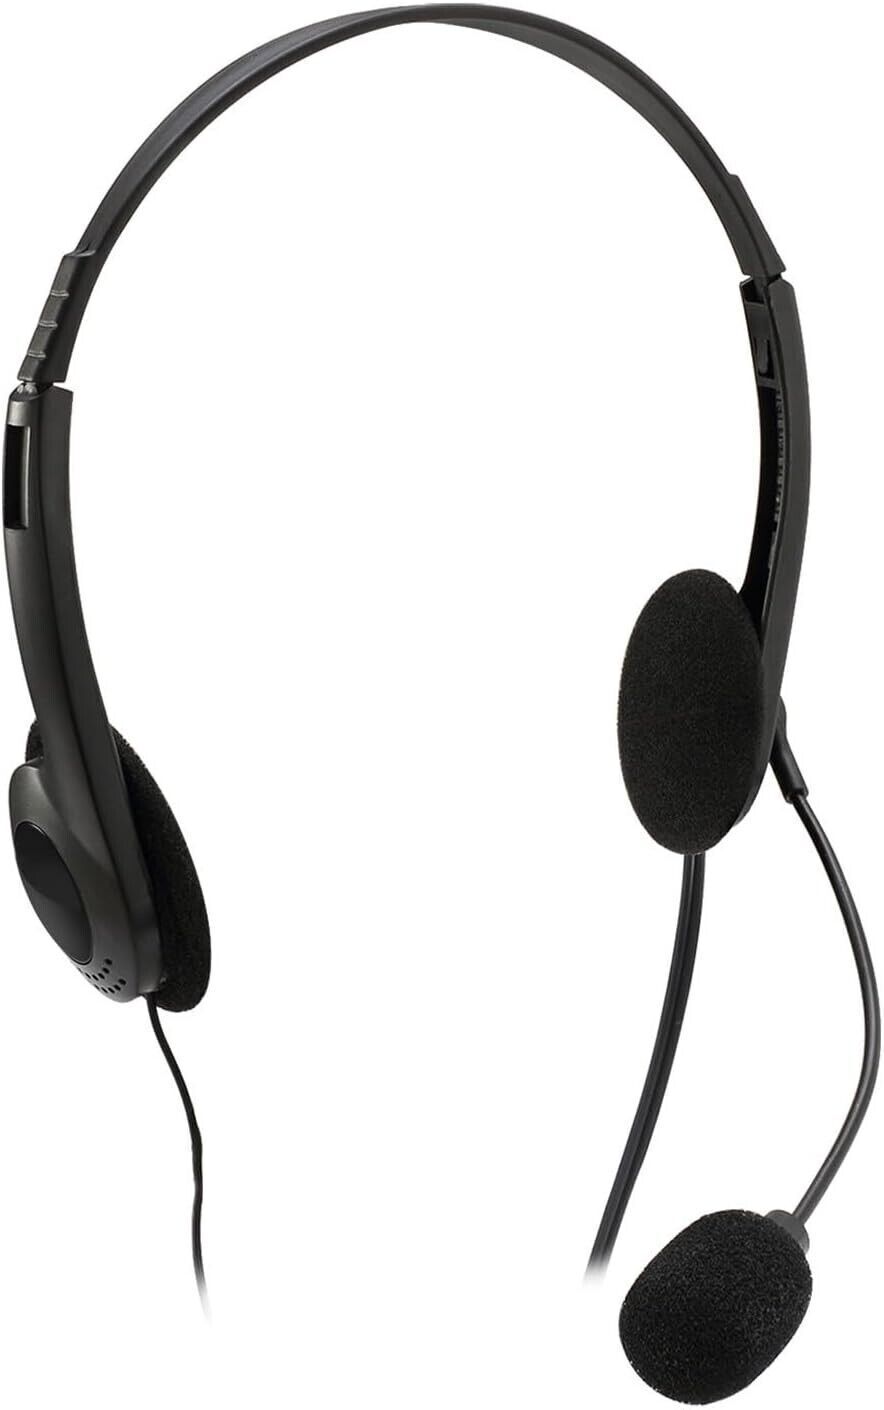 Adesso XTREAM H4 3.5mm Stereo Headset with Microphone - Noise Cancelling - Wired